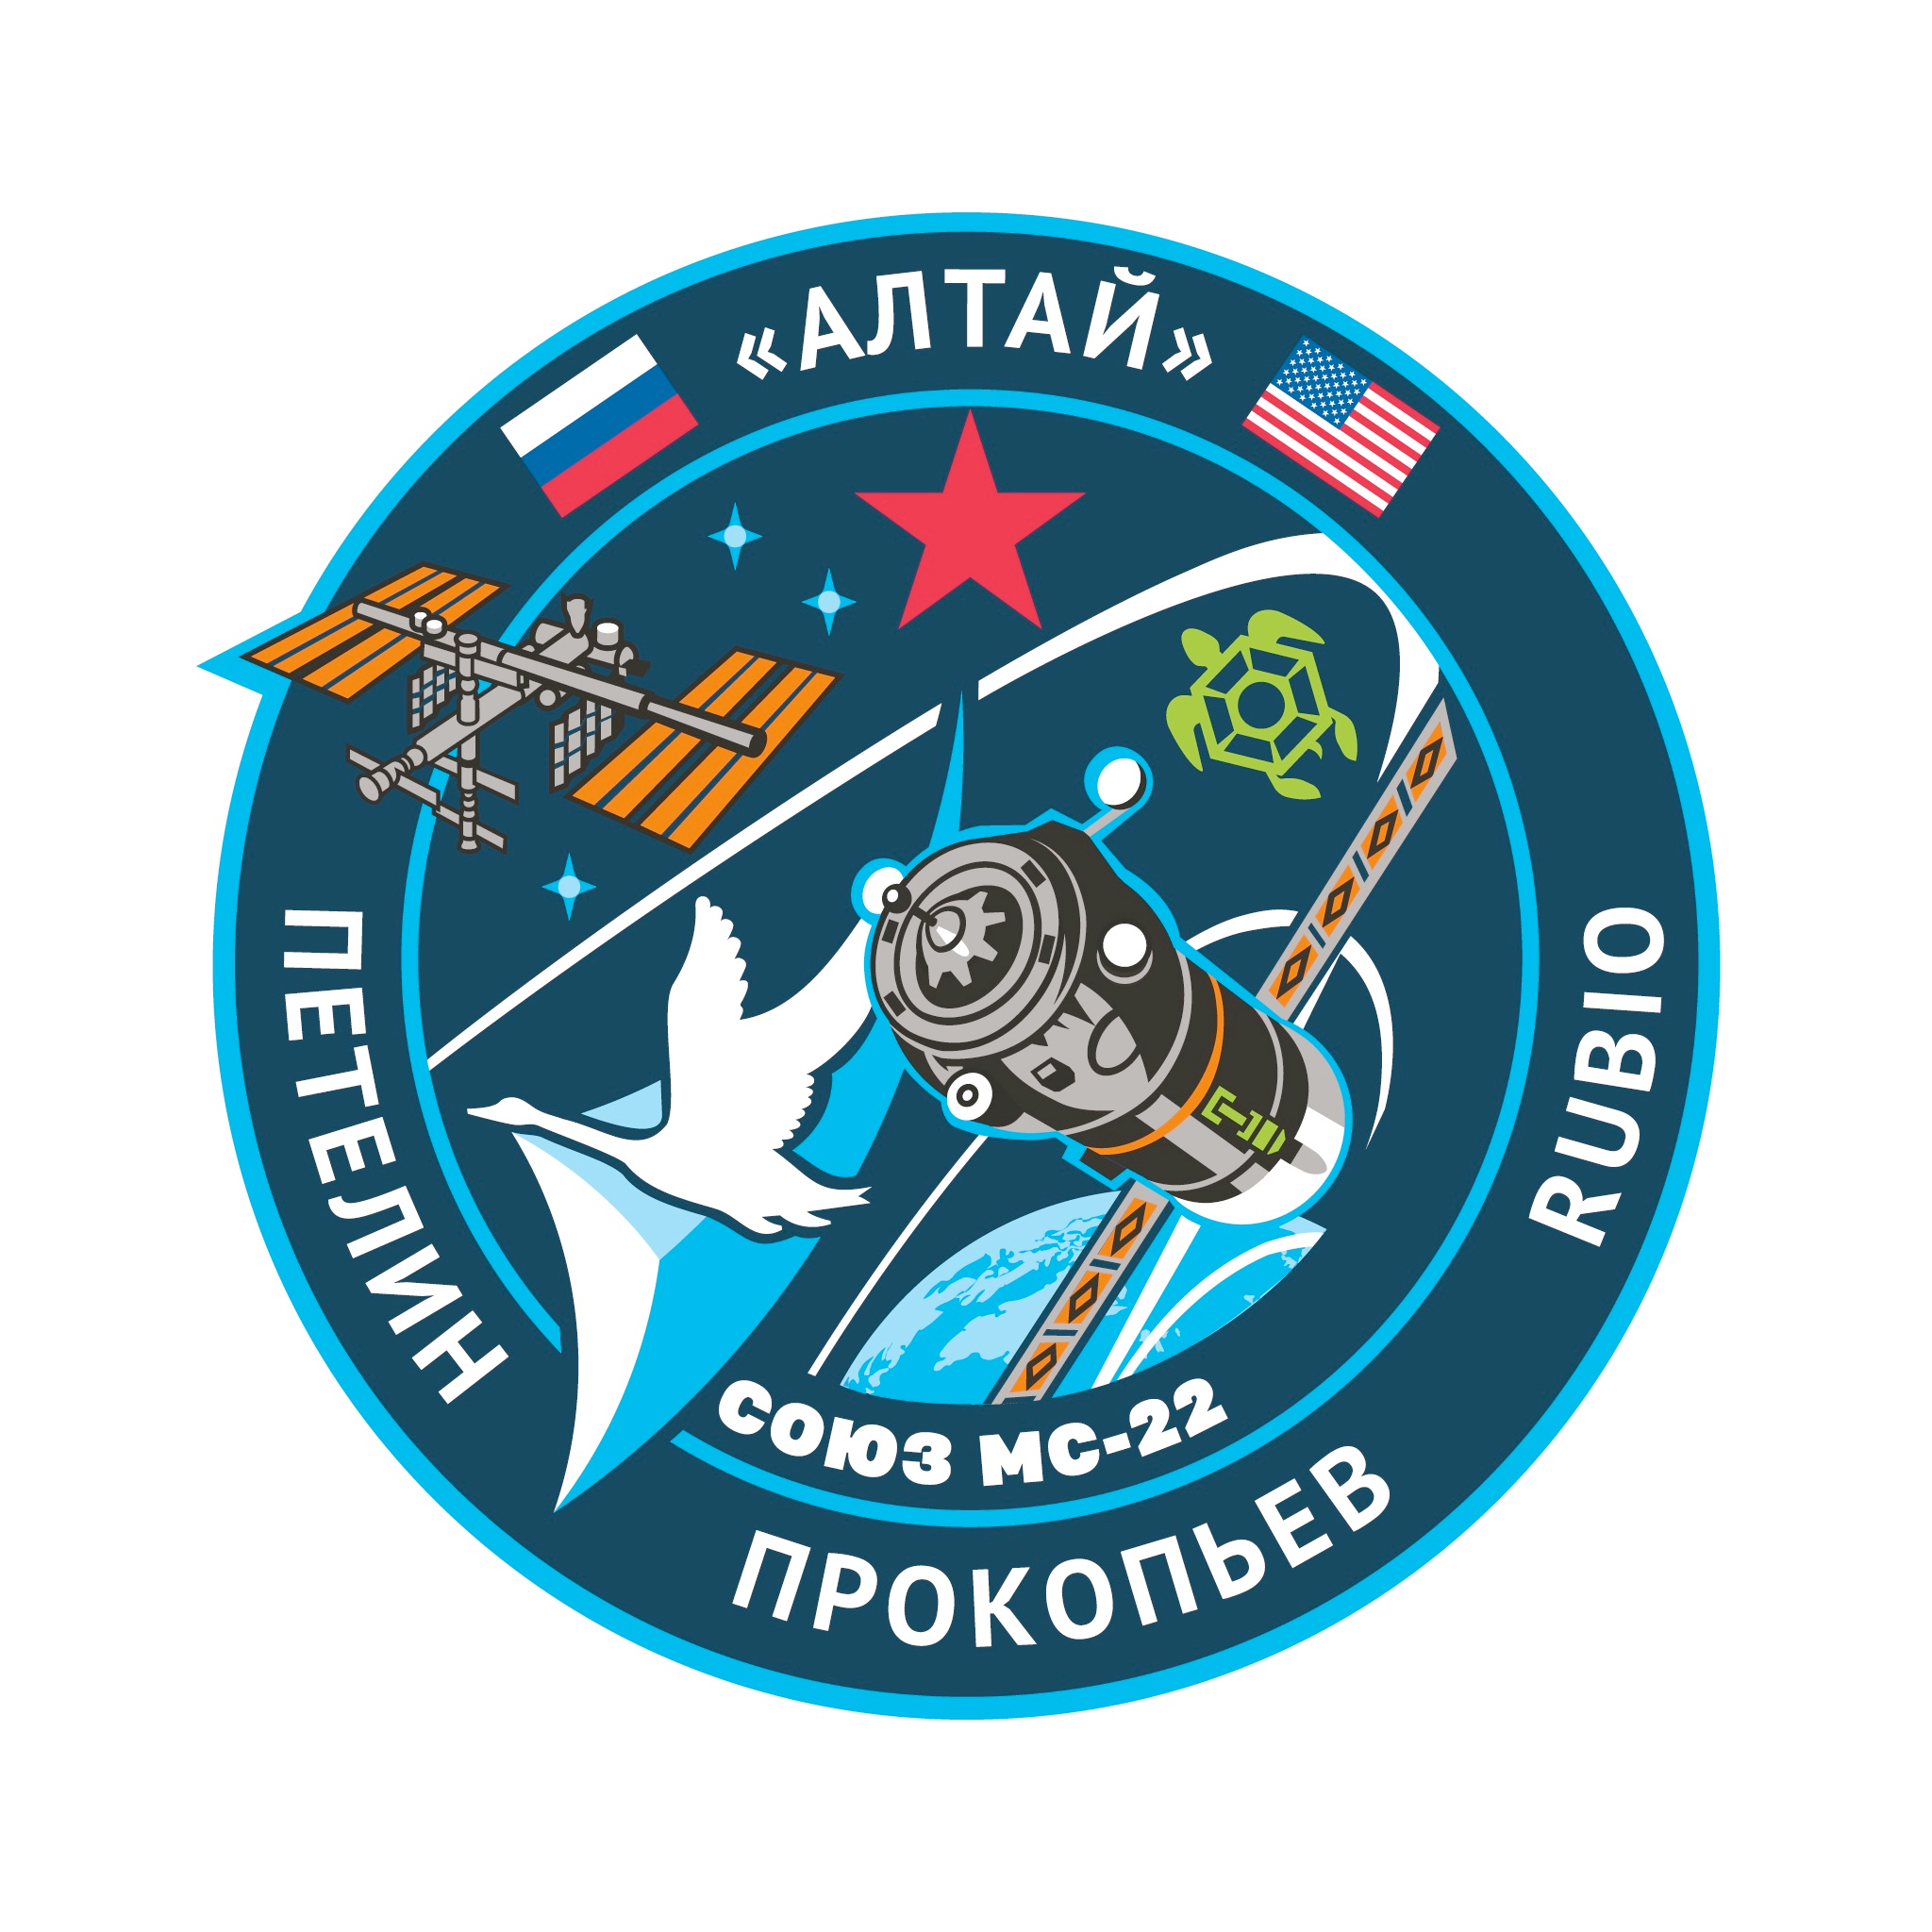 The Soyuz MS-22 mission patch has elements symbolizing each of the three crew members.